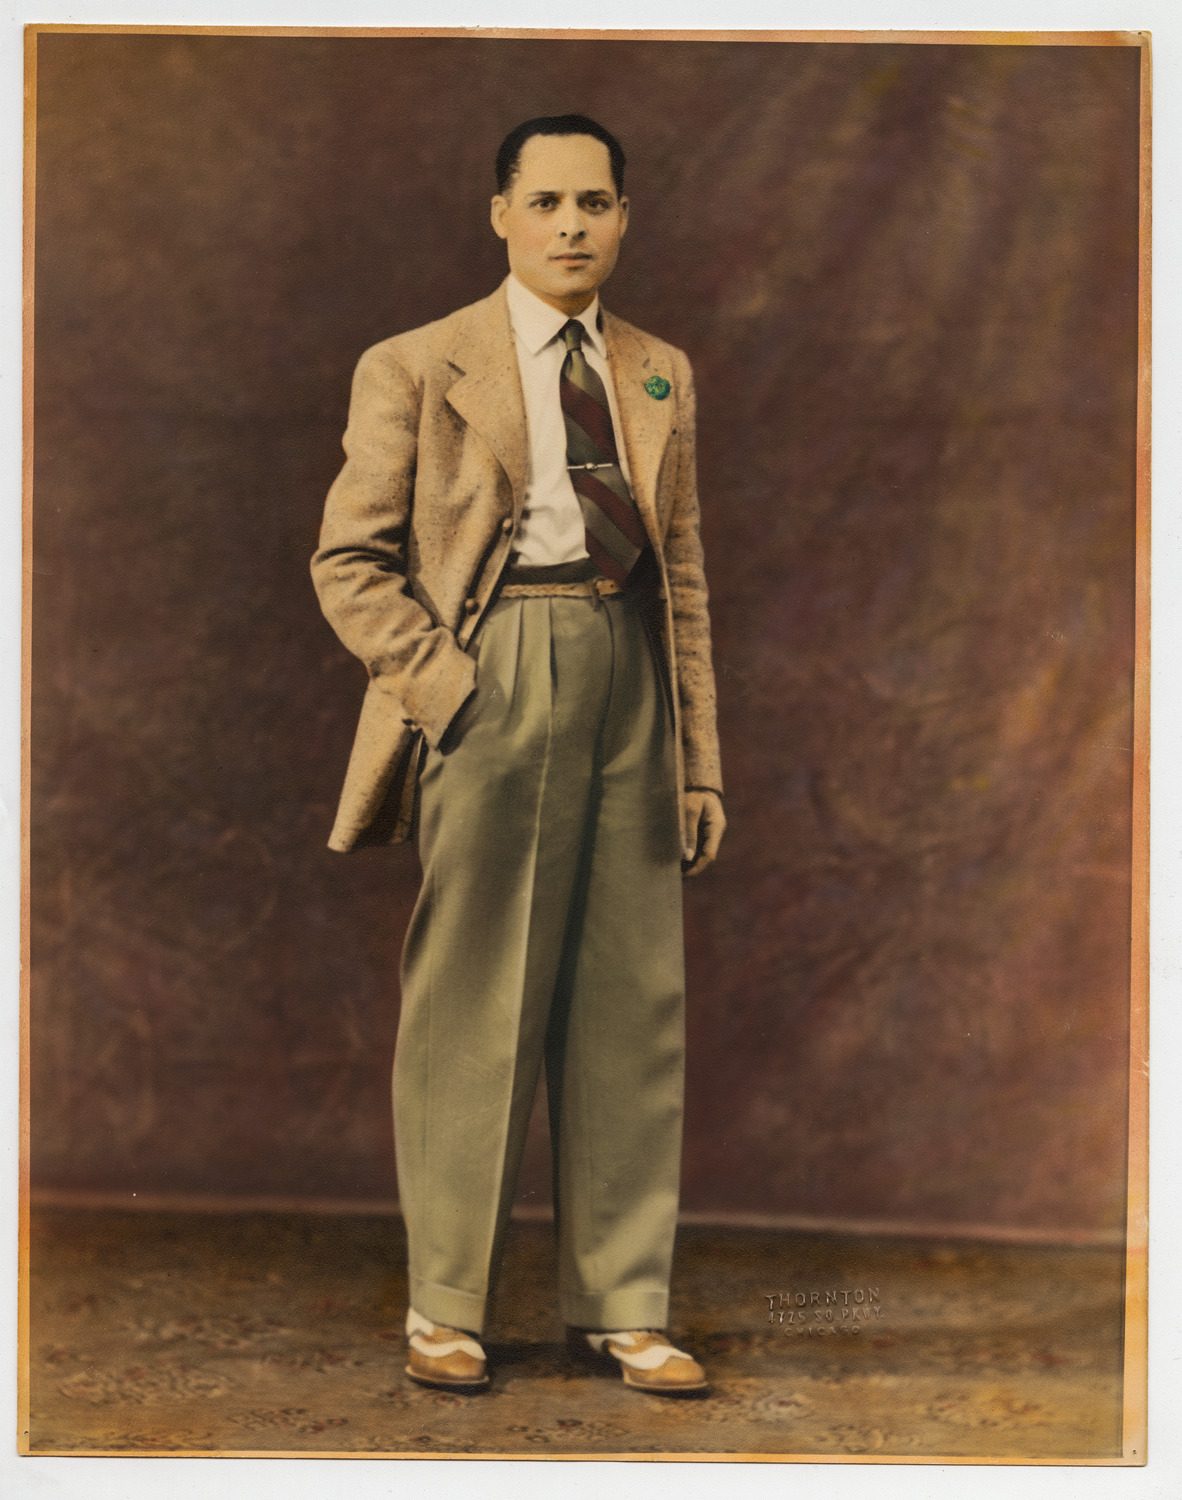 Hand-colored portrait of Scotty Piper dressed in a suit.